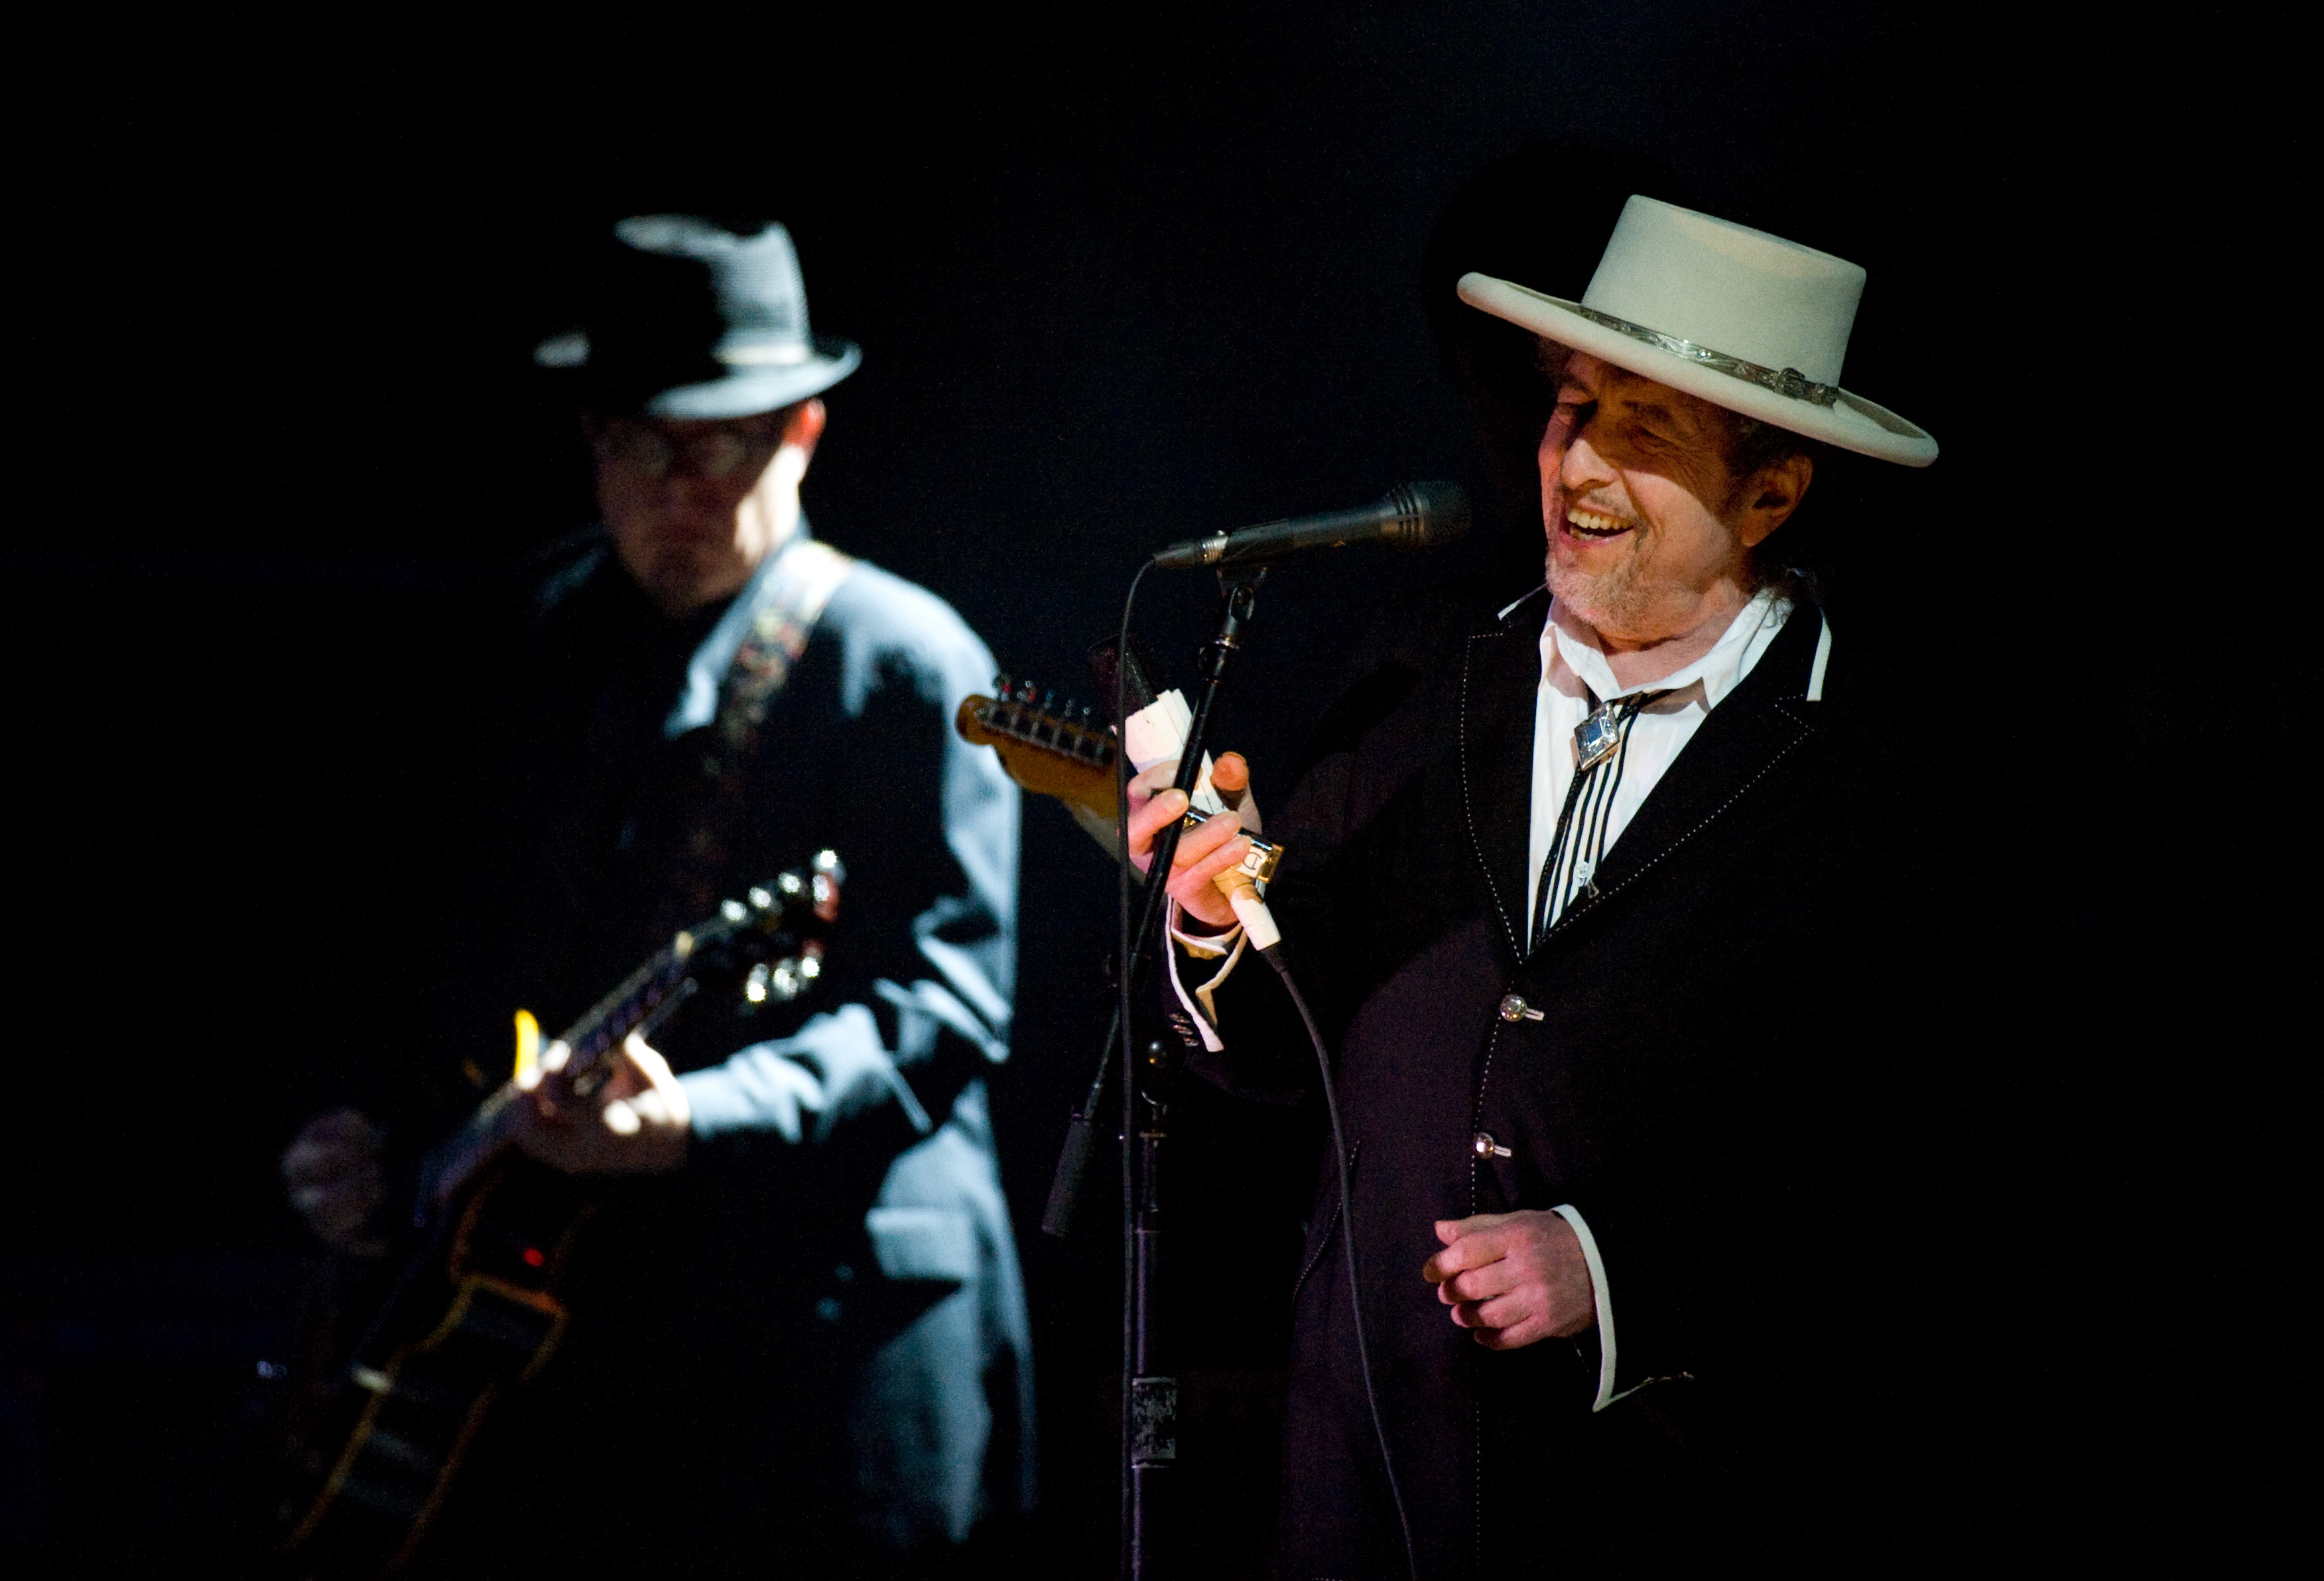 Bob Dylan headlines the Feis Festival in Finsbury Park on June 18, 2011 in London, England. (Samir Hussein—Getty Images)